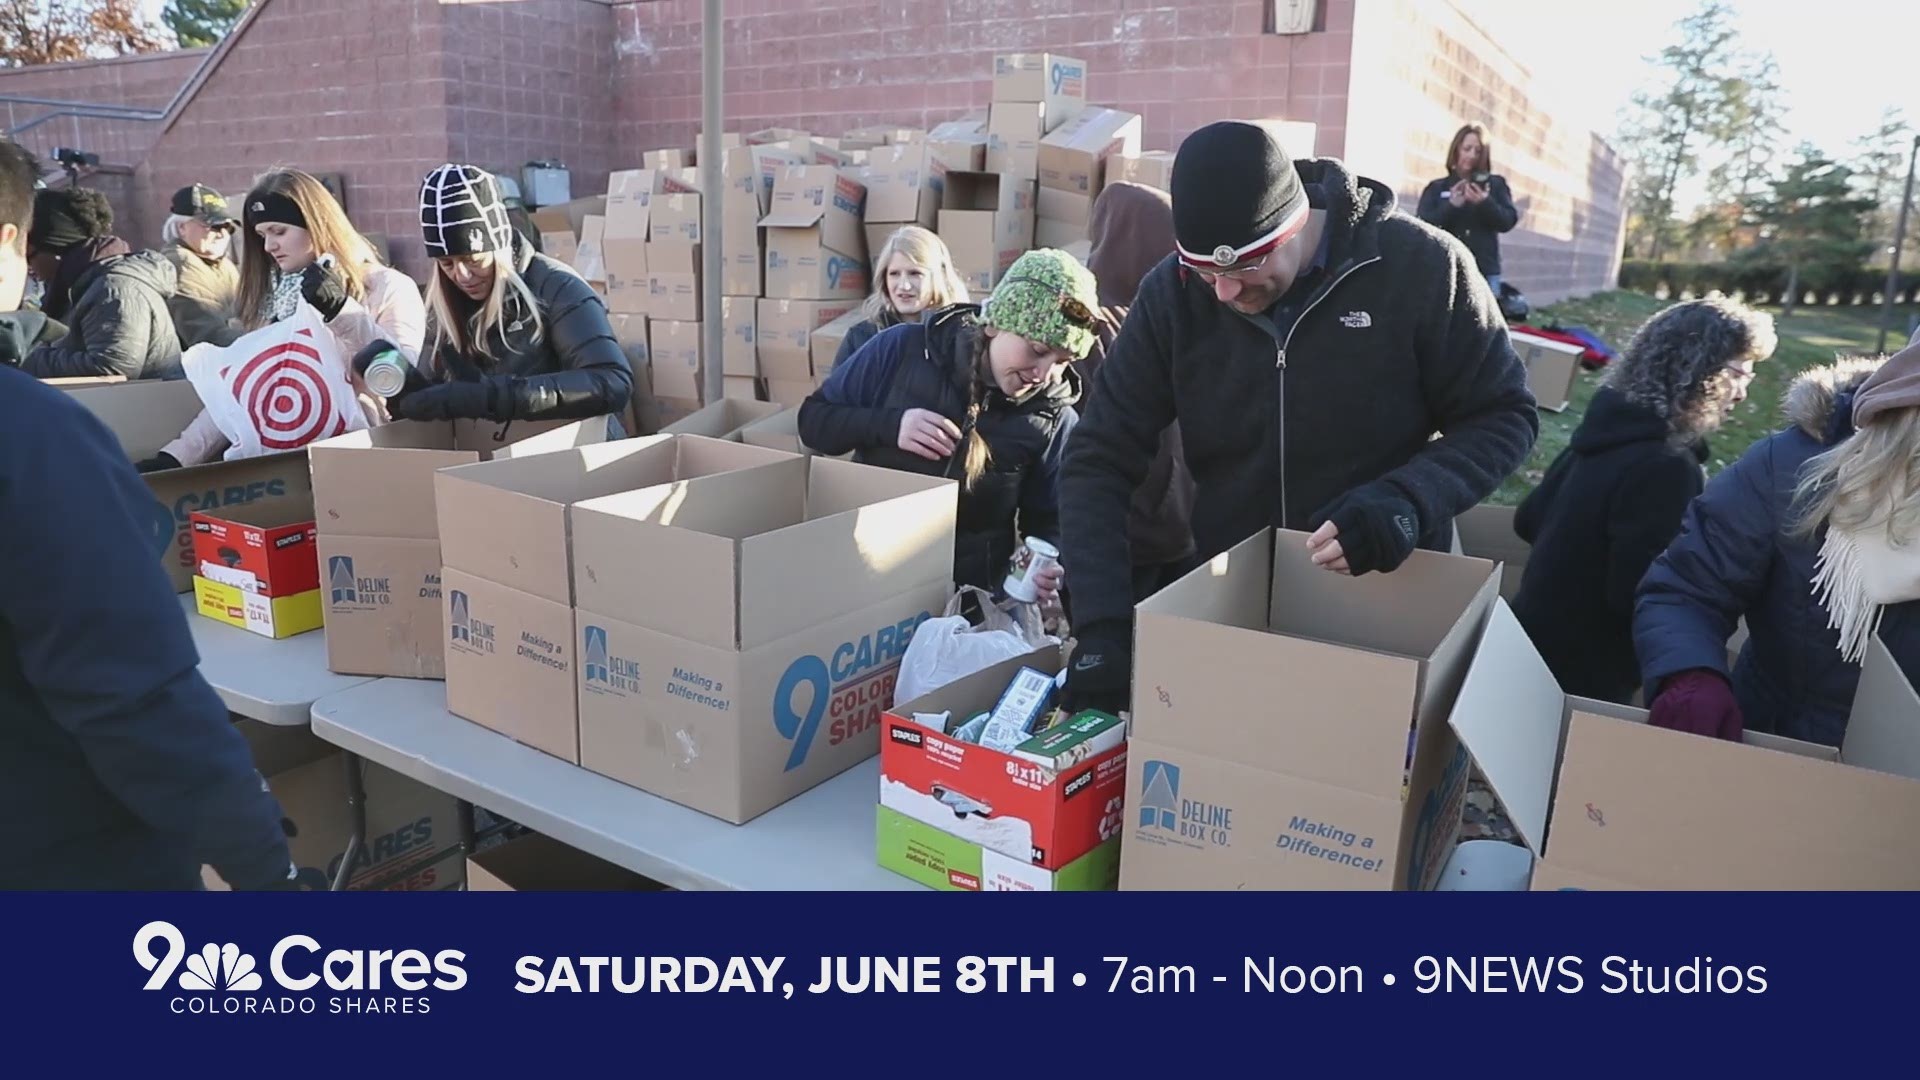 Help us fill the food banks and pantries in our community by donating nonperishable food at our 9Cares summer food drive. The annual event will be held on Saturday, June 8, 2019 from 7 a.m. to 12 p.m. The event will take place at the 9NEWS Studios at 500 East Speer Boulevard in Denver.